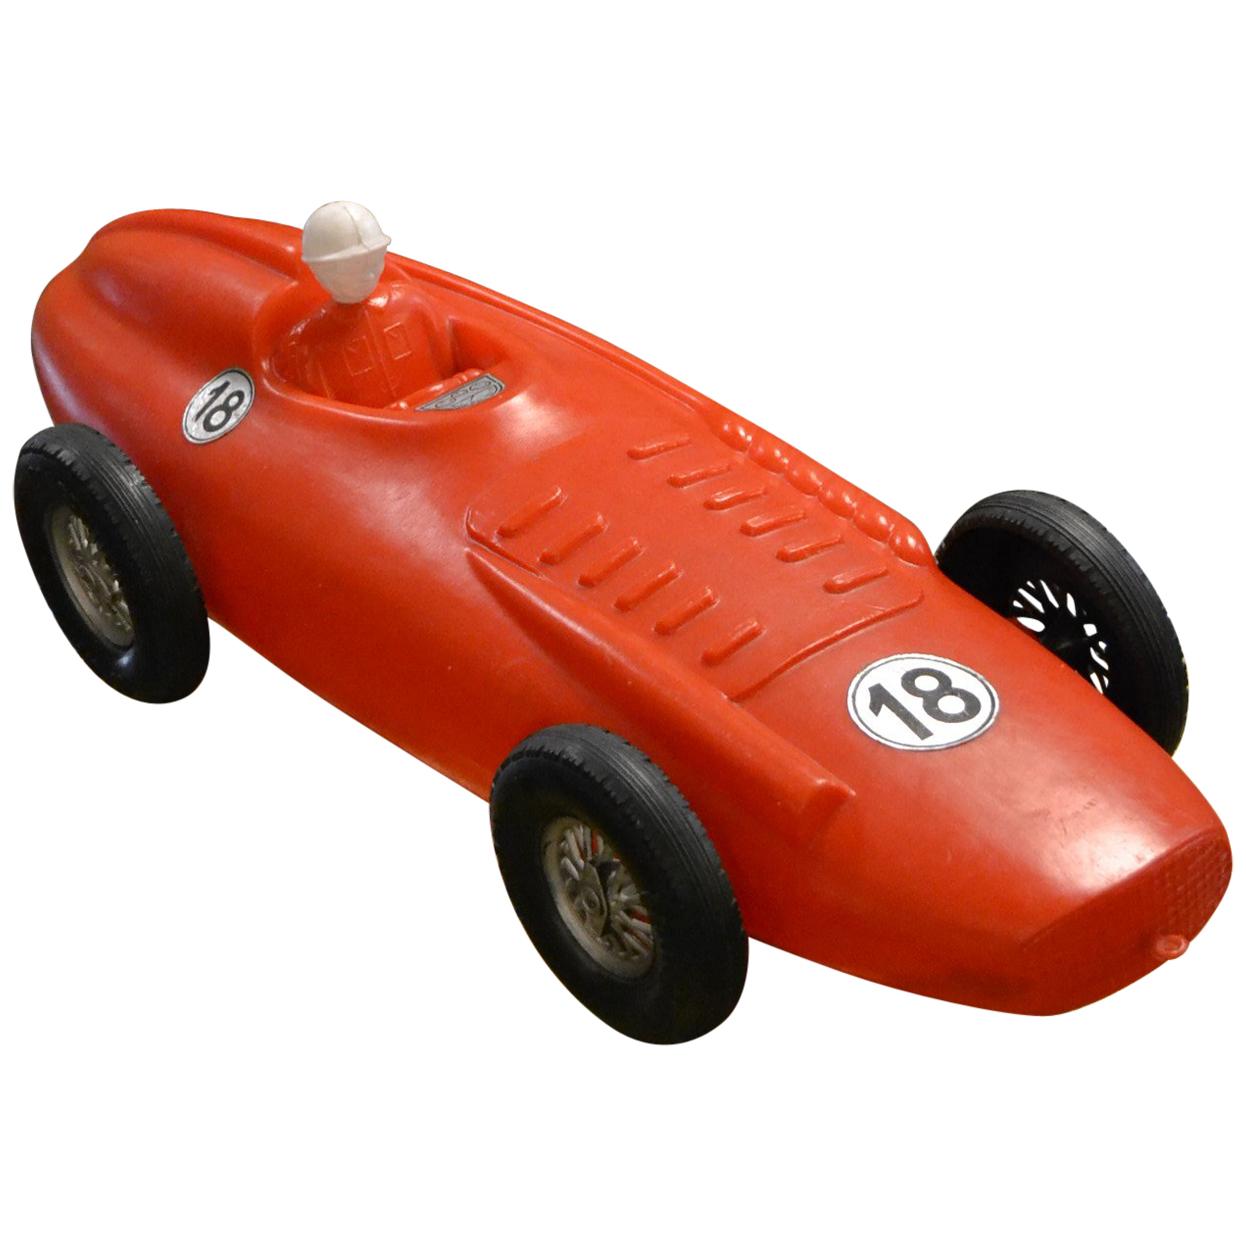 1960s Extra Large Racing Car Toy with Driver